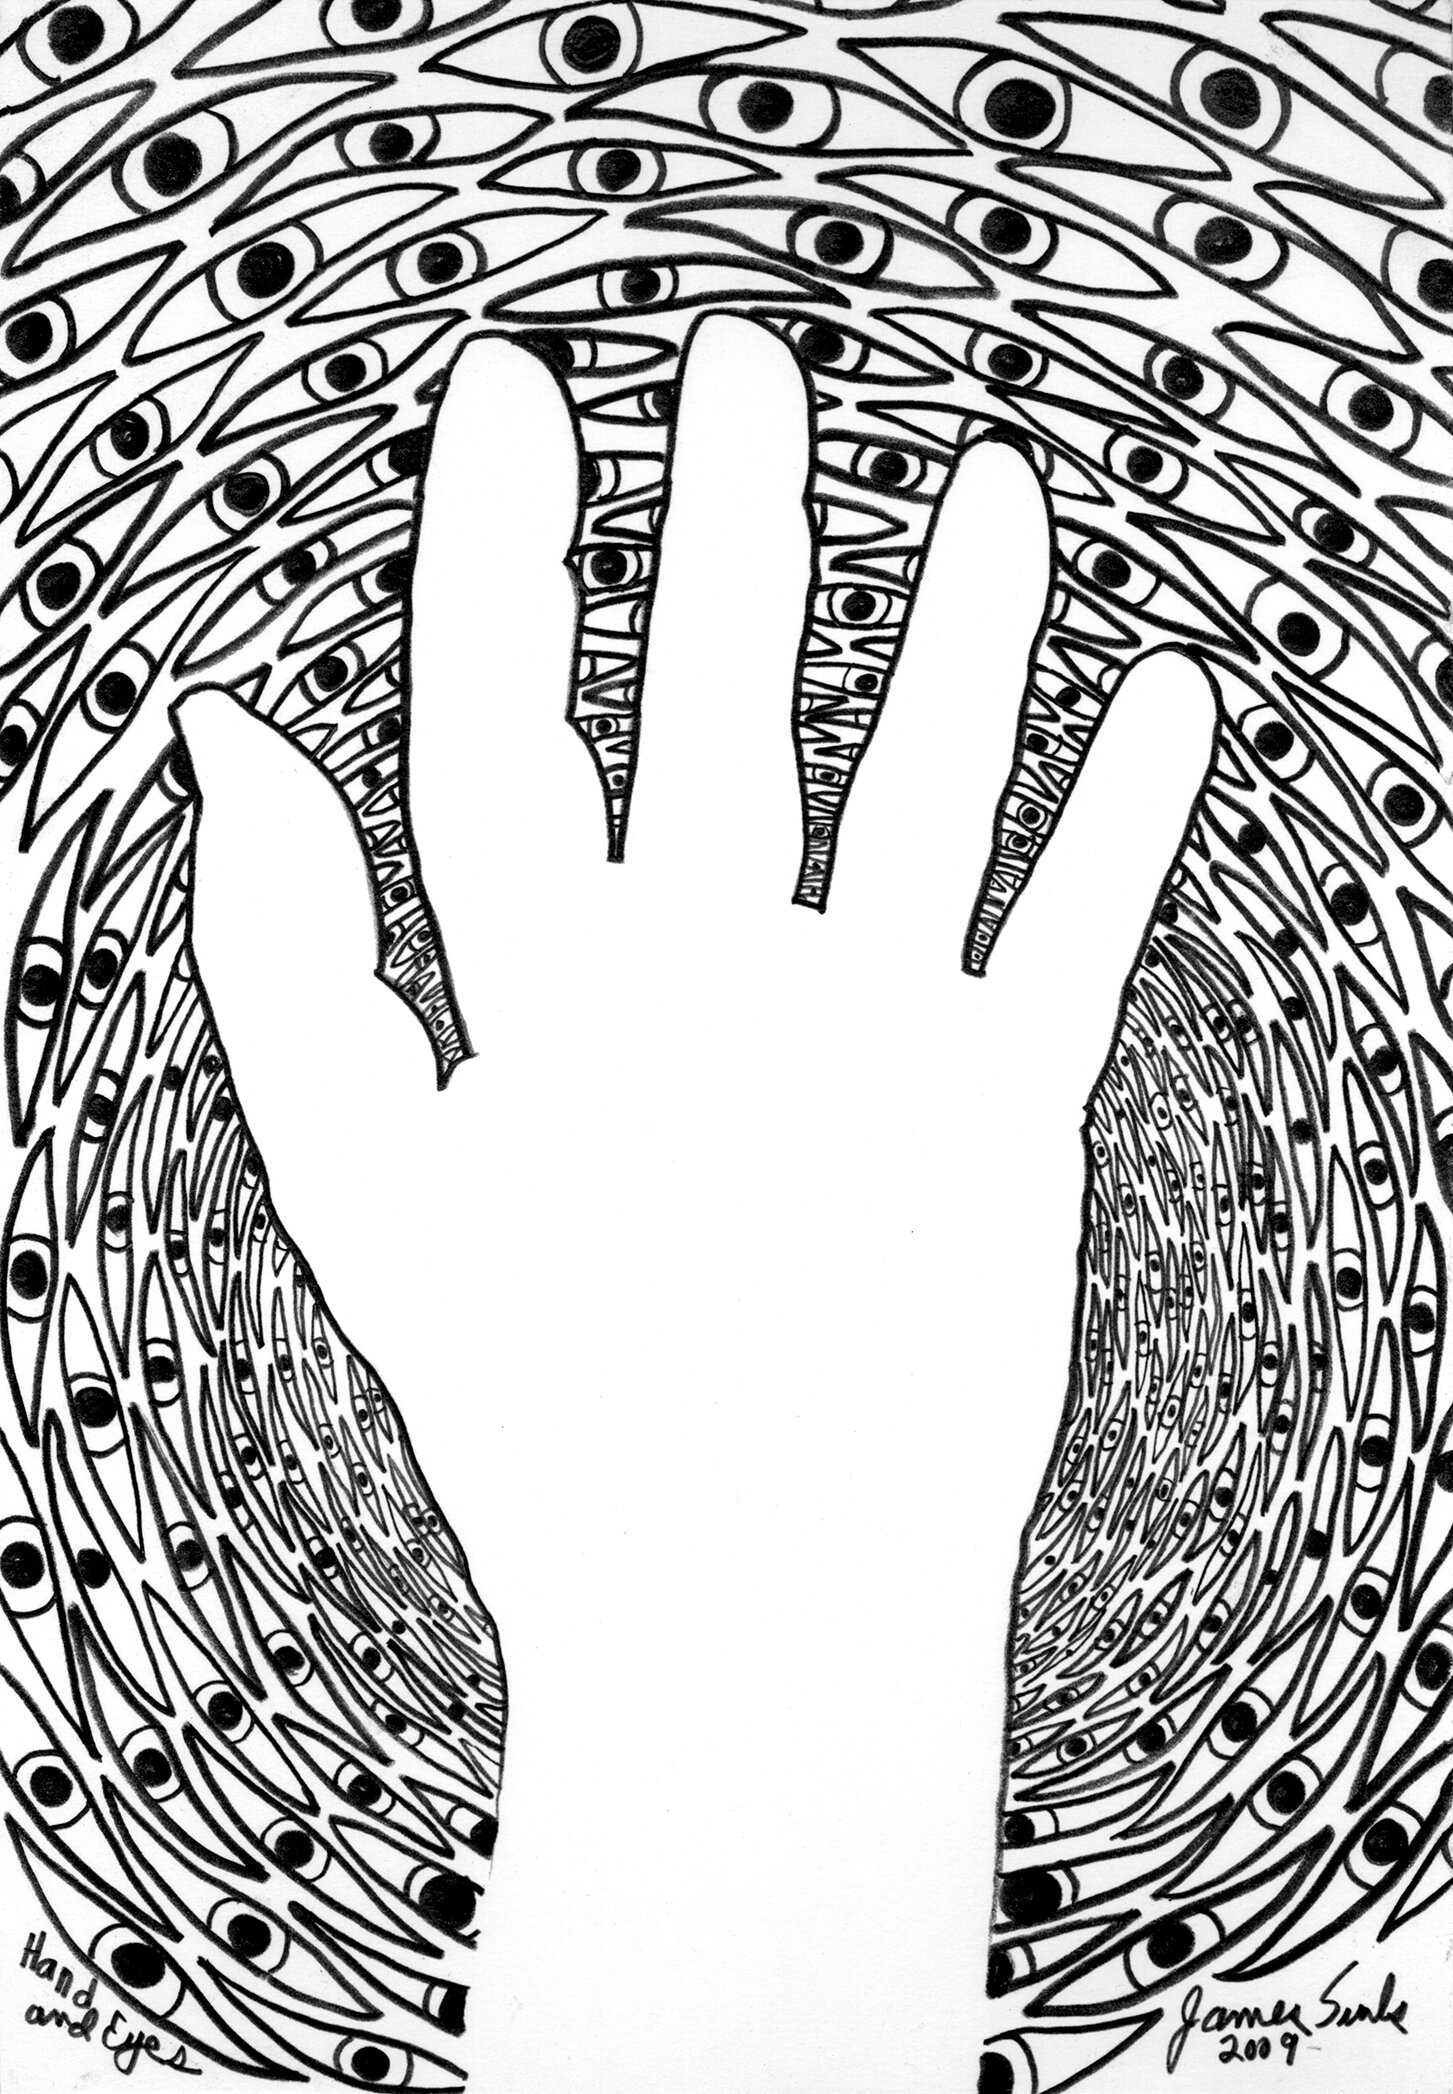 Hand and Eyes, 2009